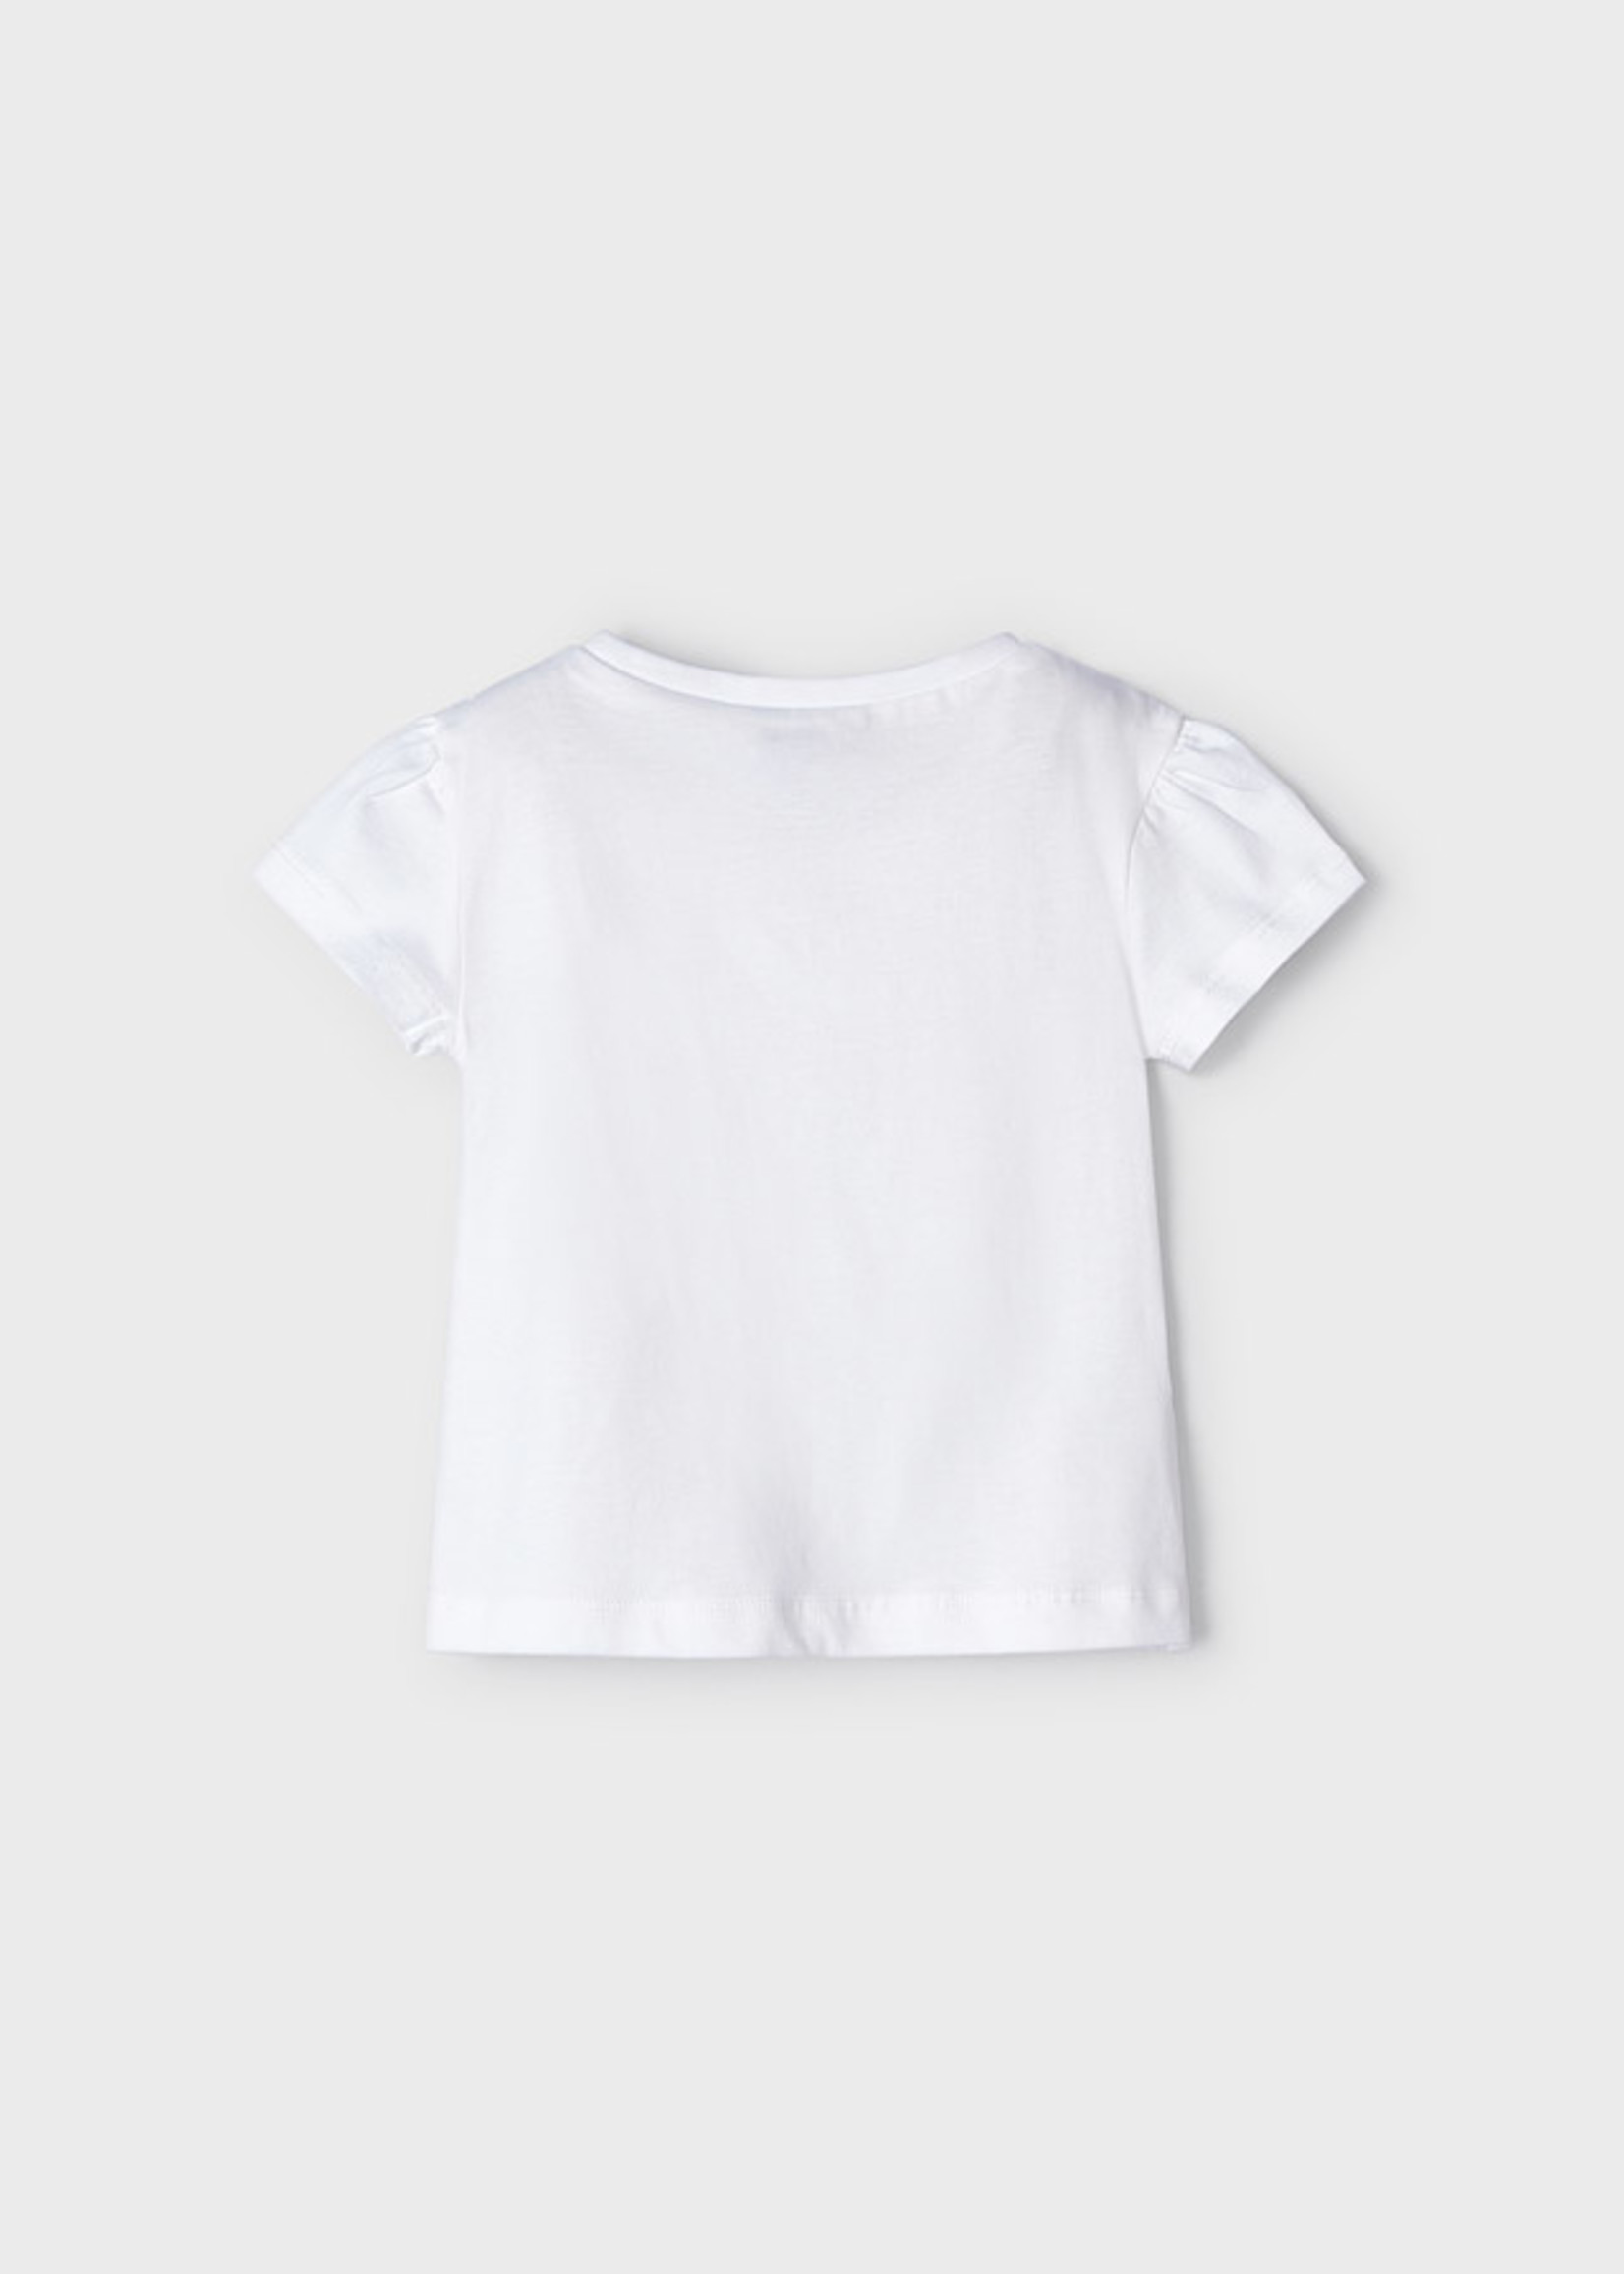 Mayoral 810 Mini Girl            S/s embroidered shirt         White